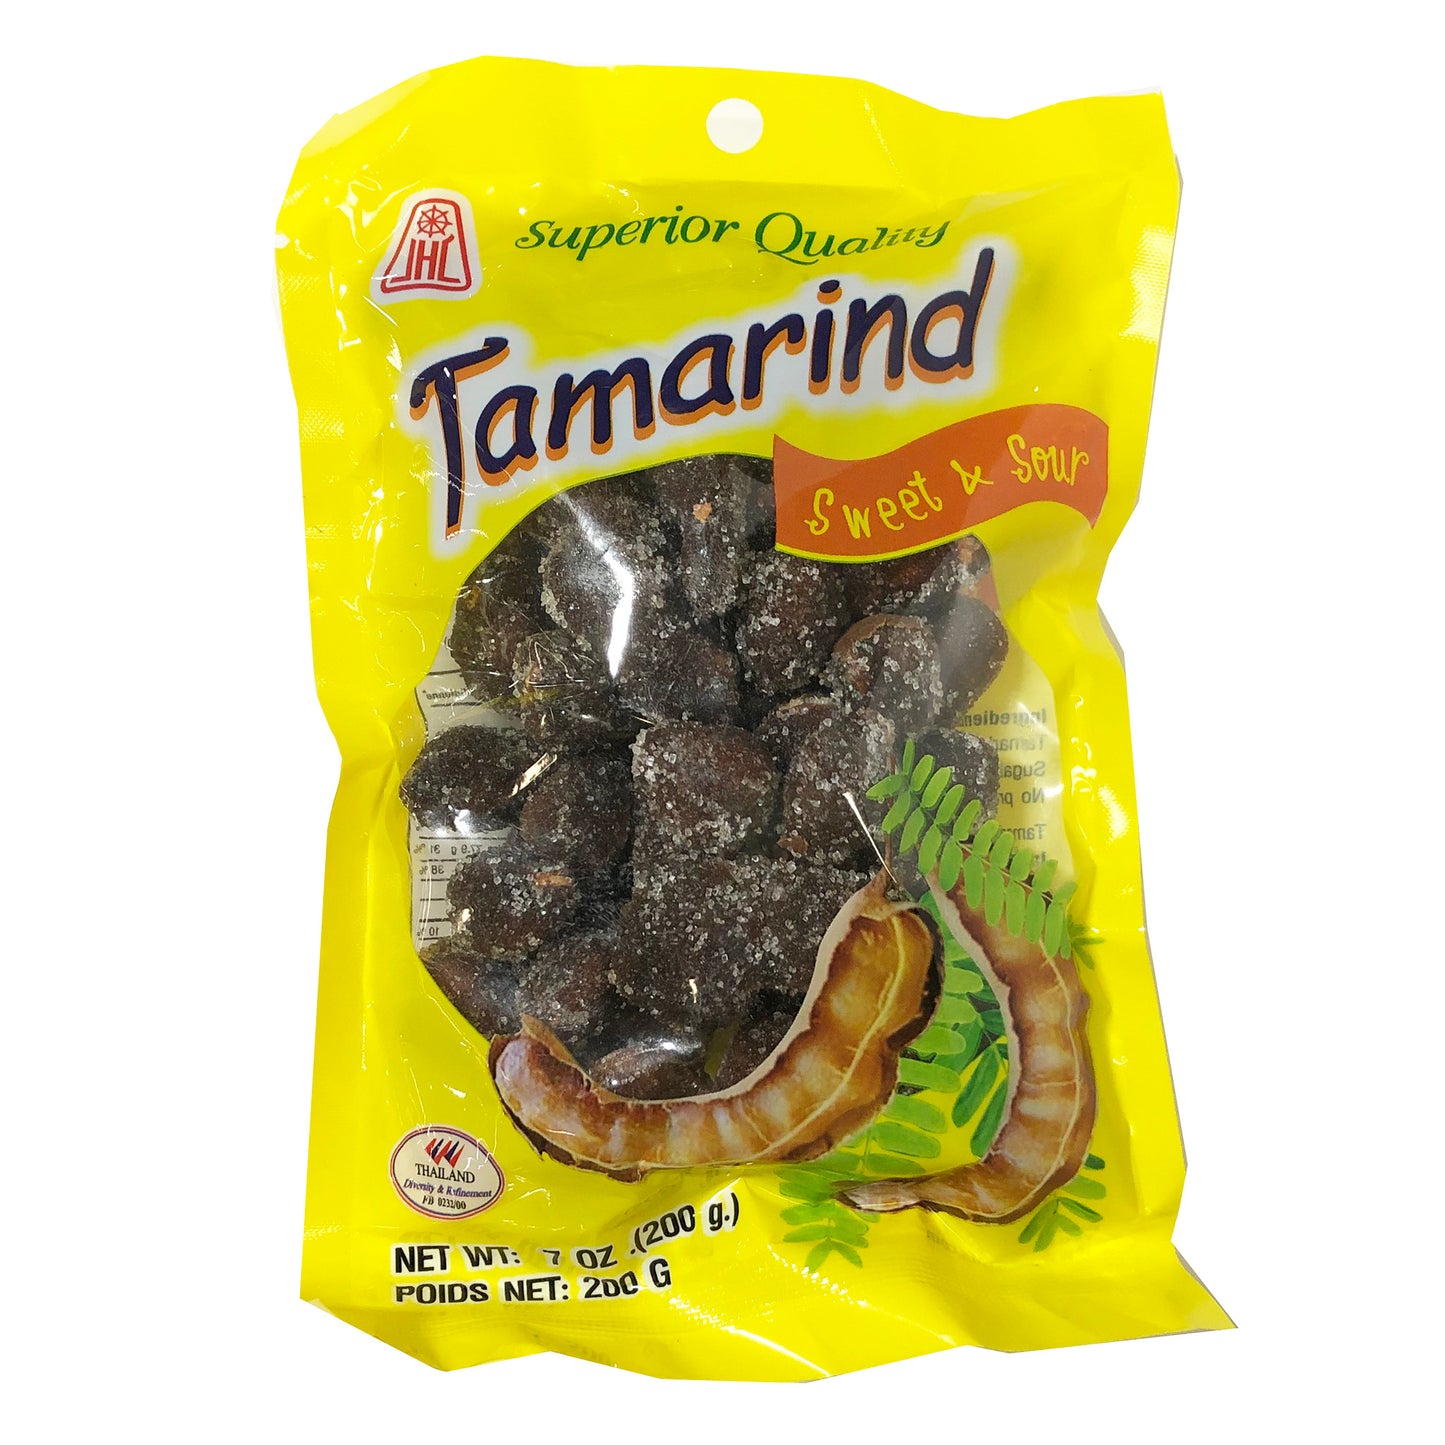 Front graphic image of Jhc Tamarind Sweet And Sour Candy 7oz